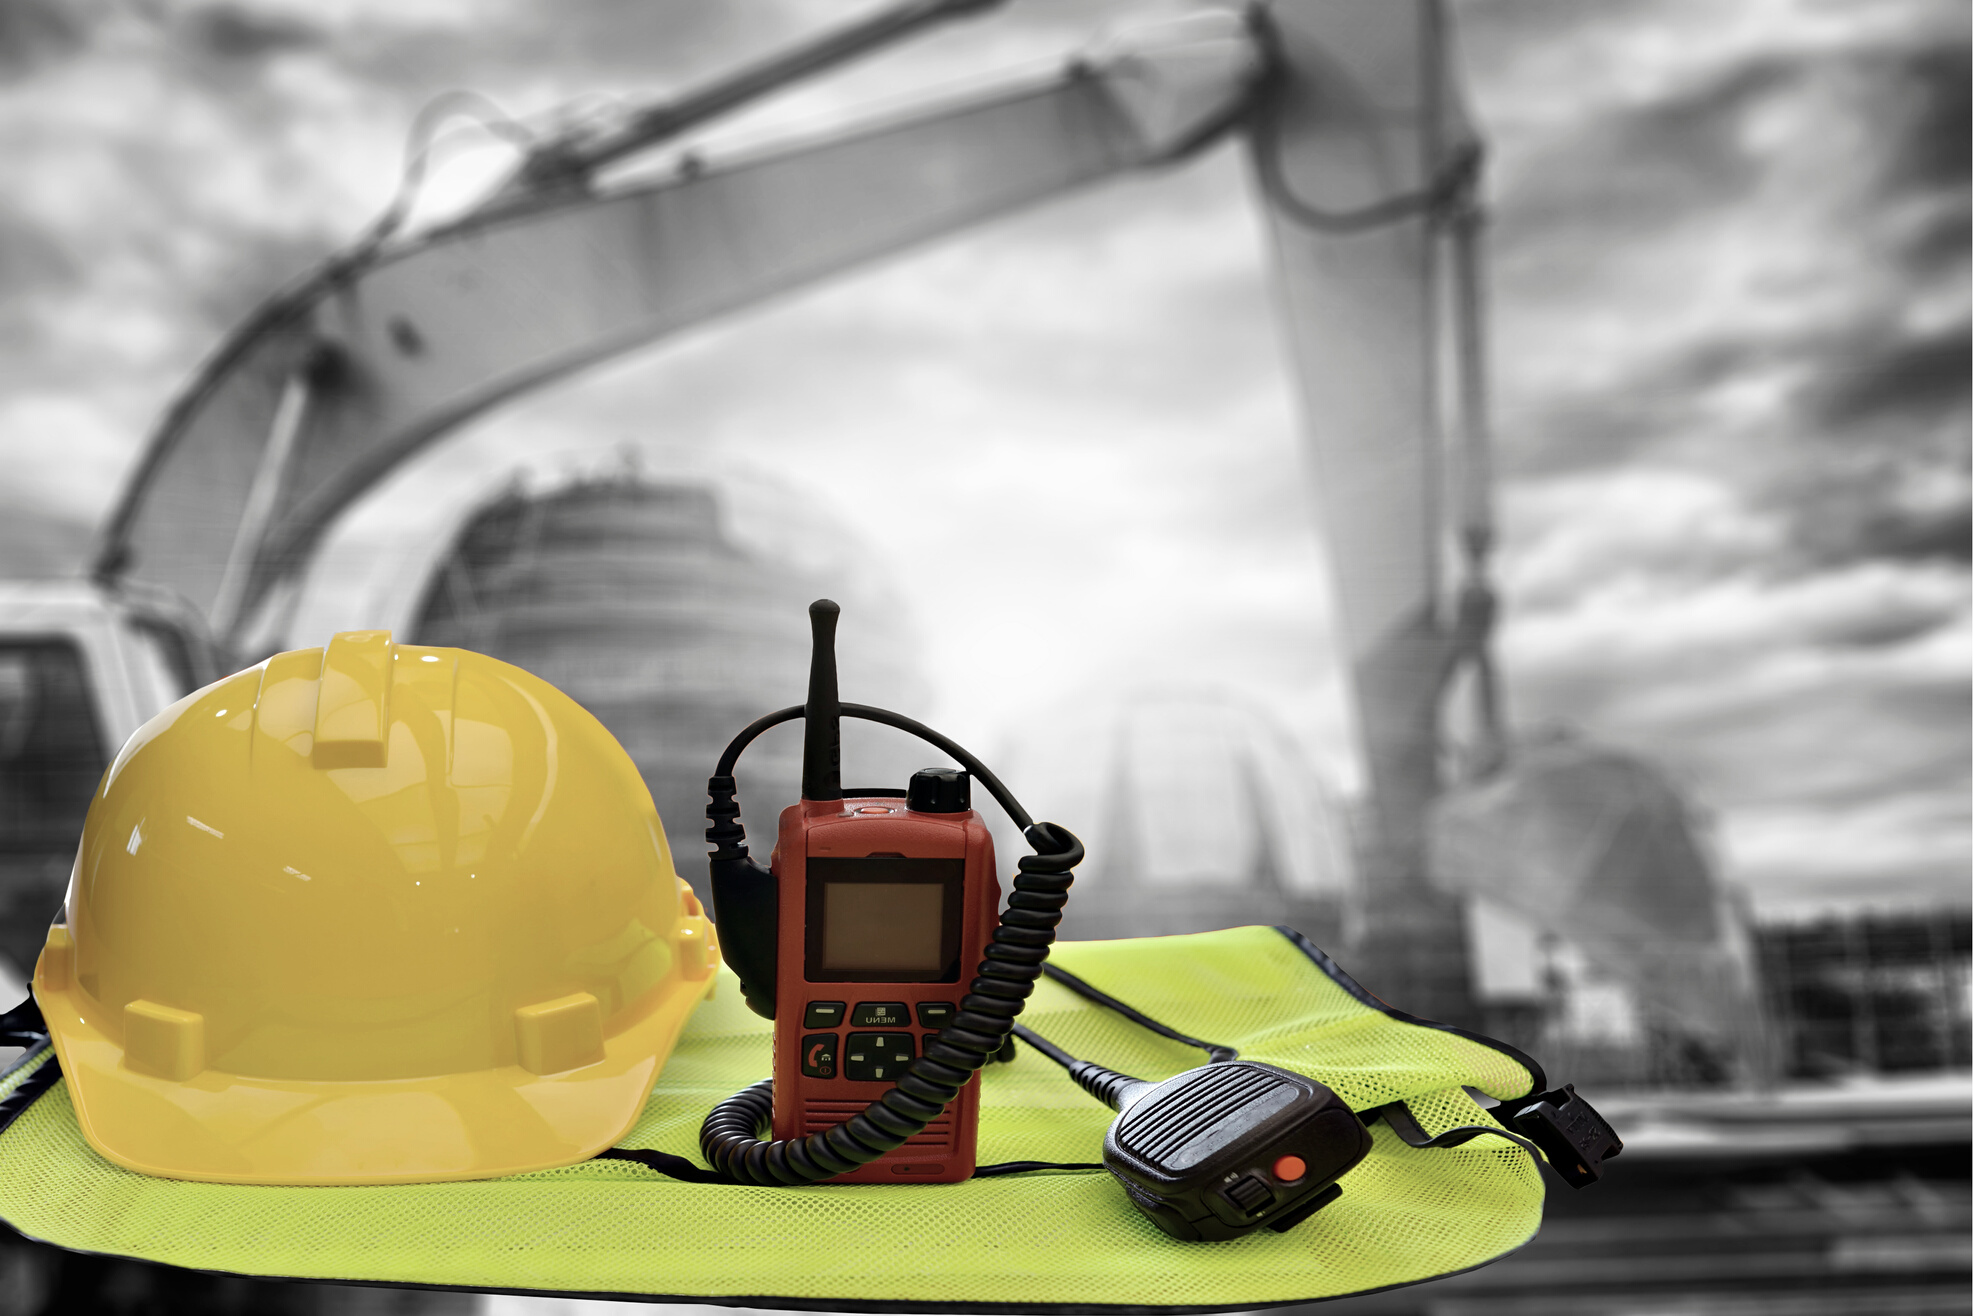 work outdoor wear safety equipment  at  construction site . occupational health and safety concept .